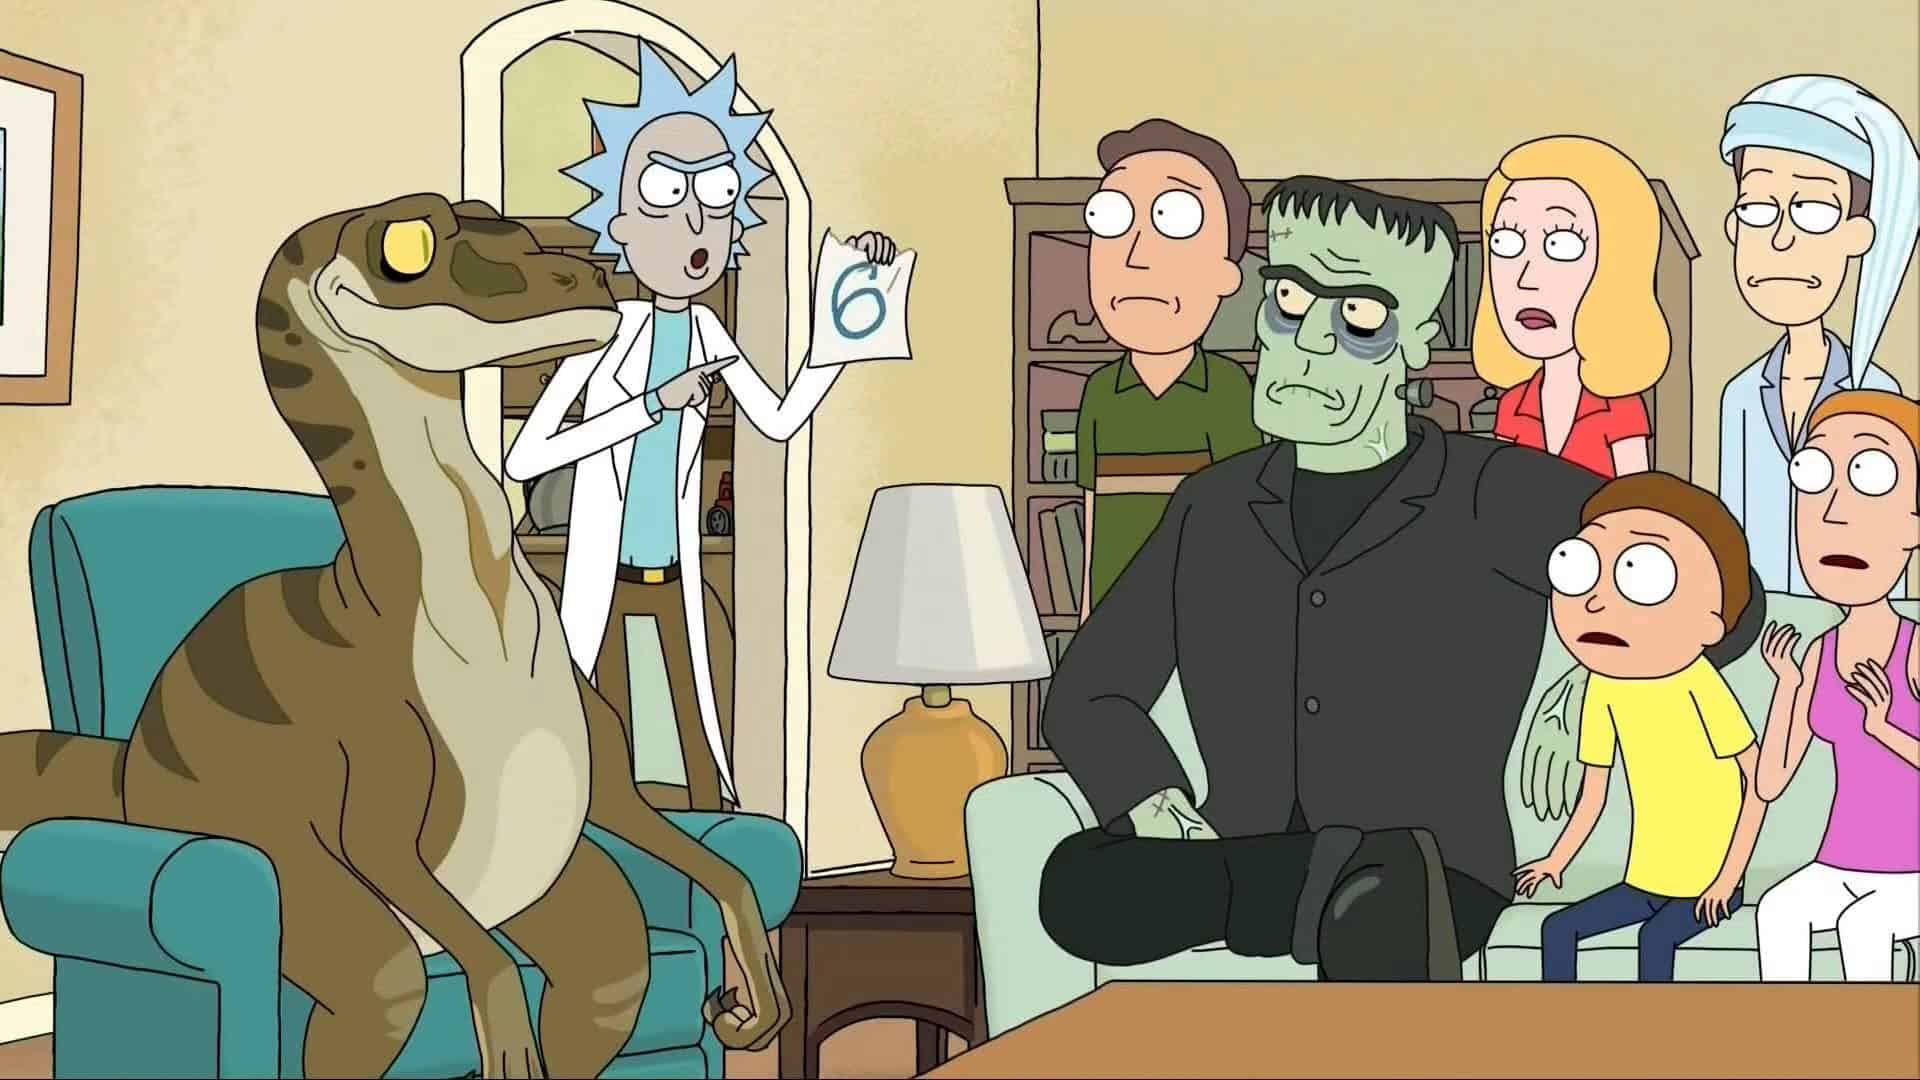 A still from Rick and Morty.